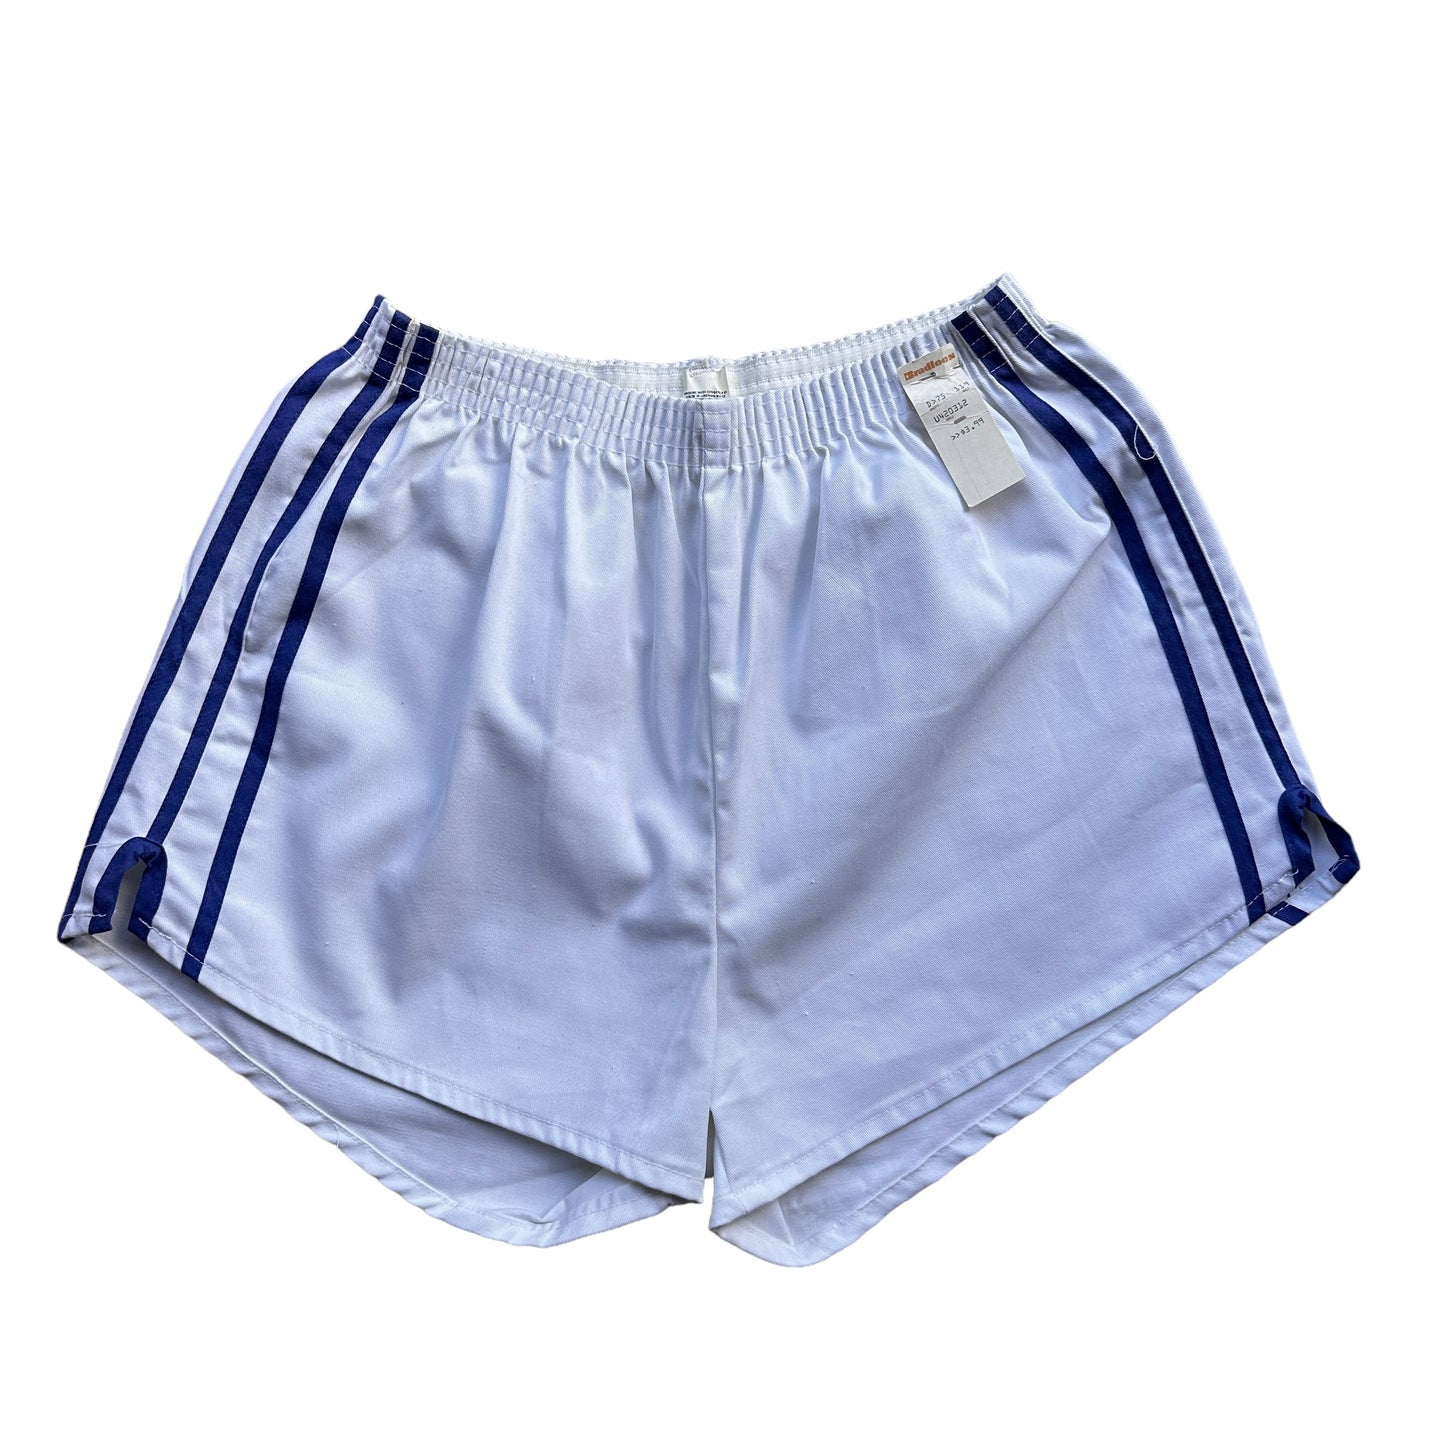 70s cotton gym shorts small